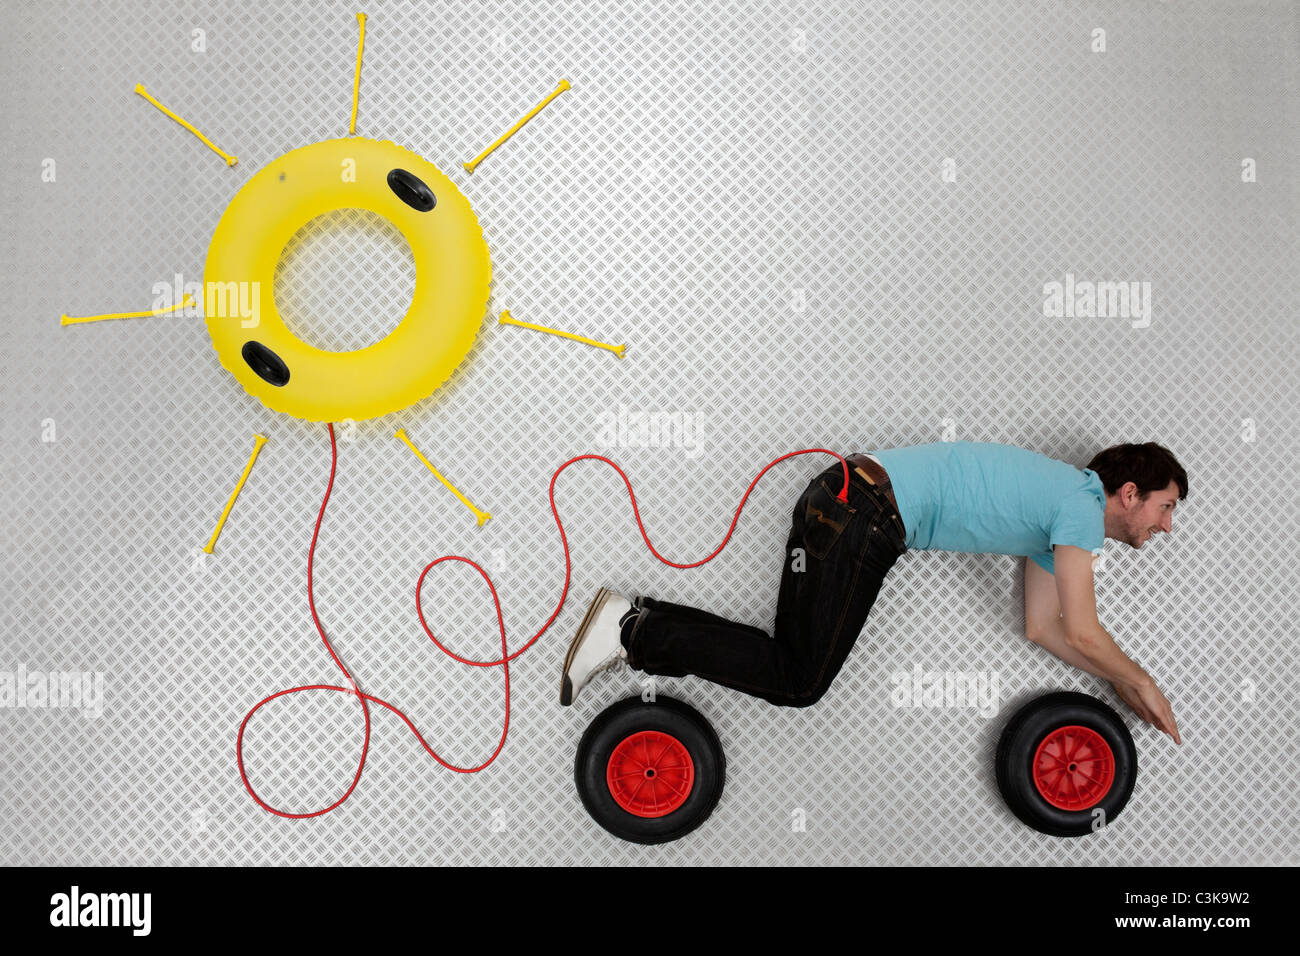 Mid adult man forming car shape connected to sun shape float Stock Photo